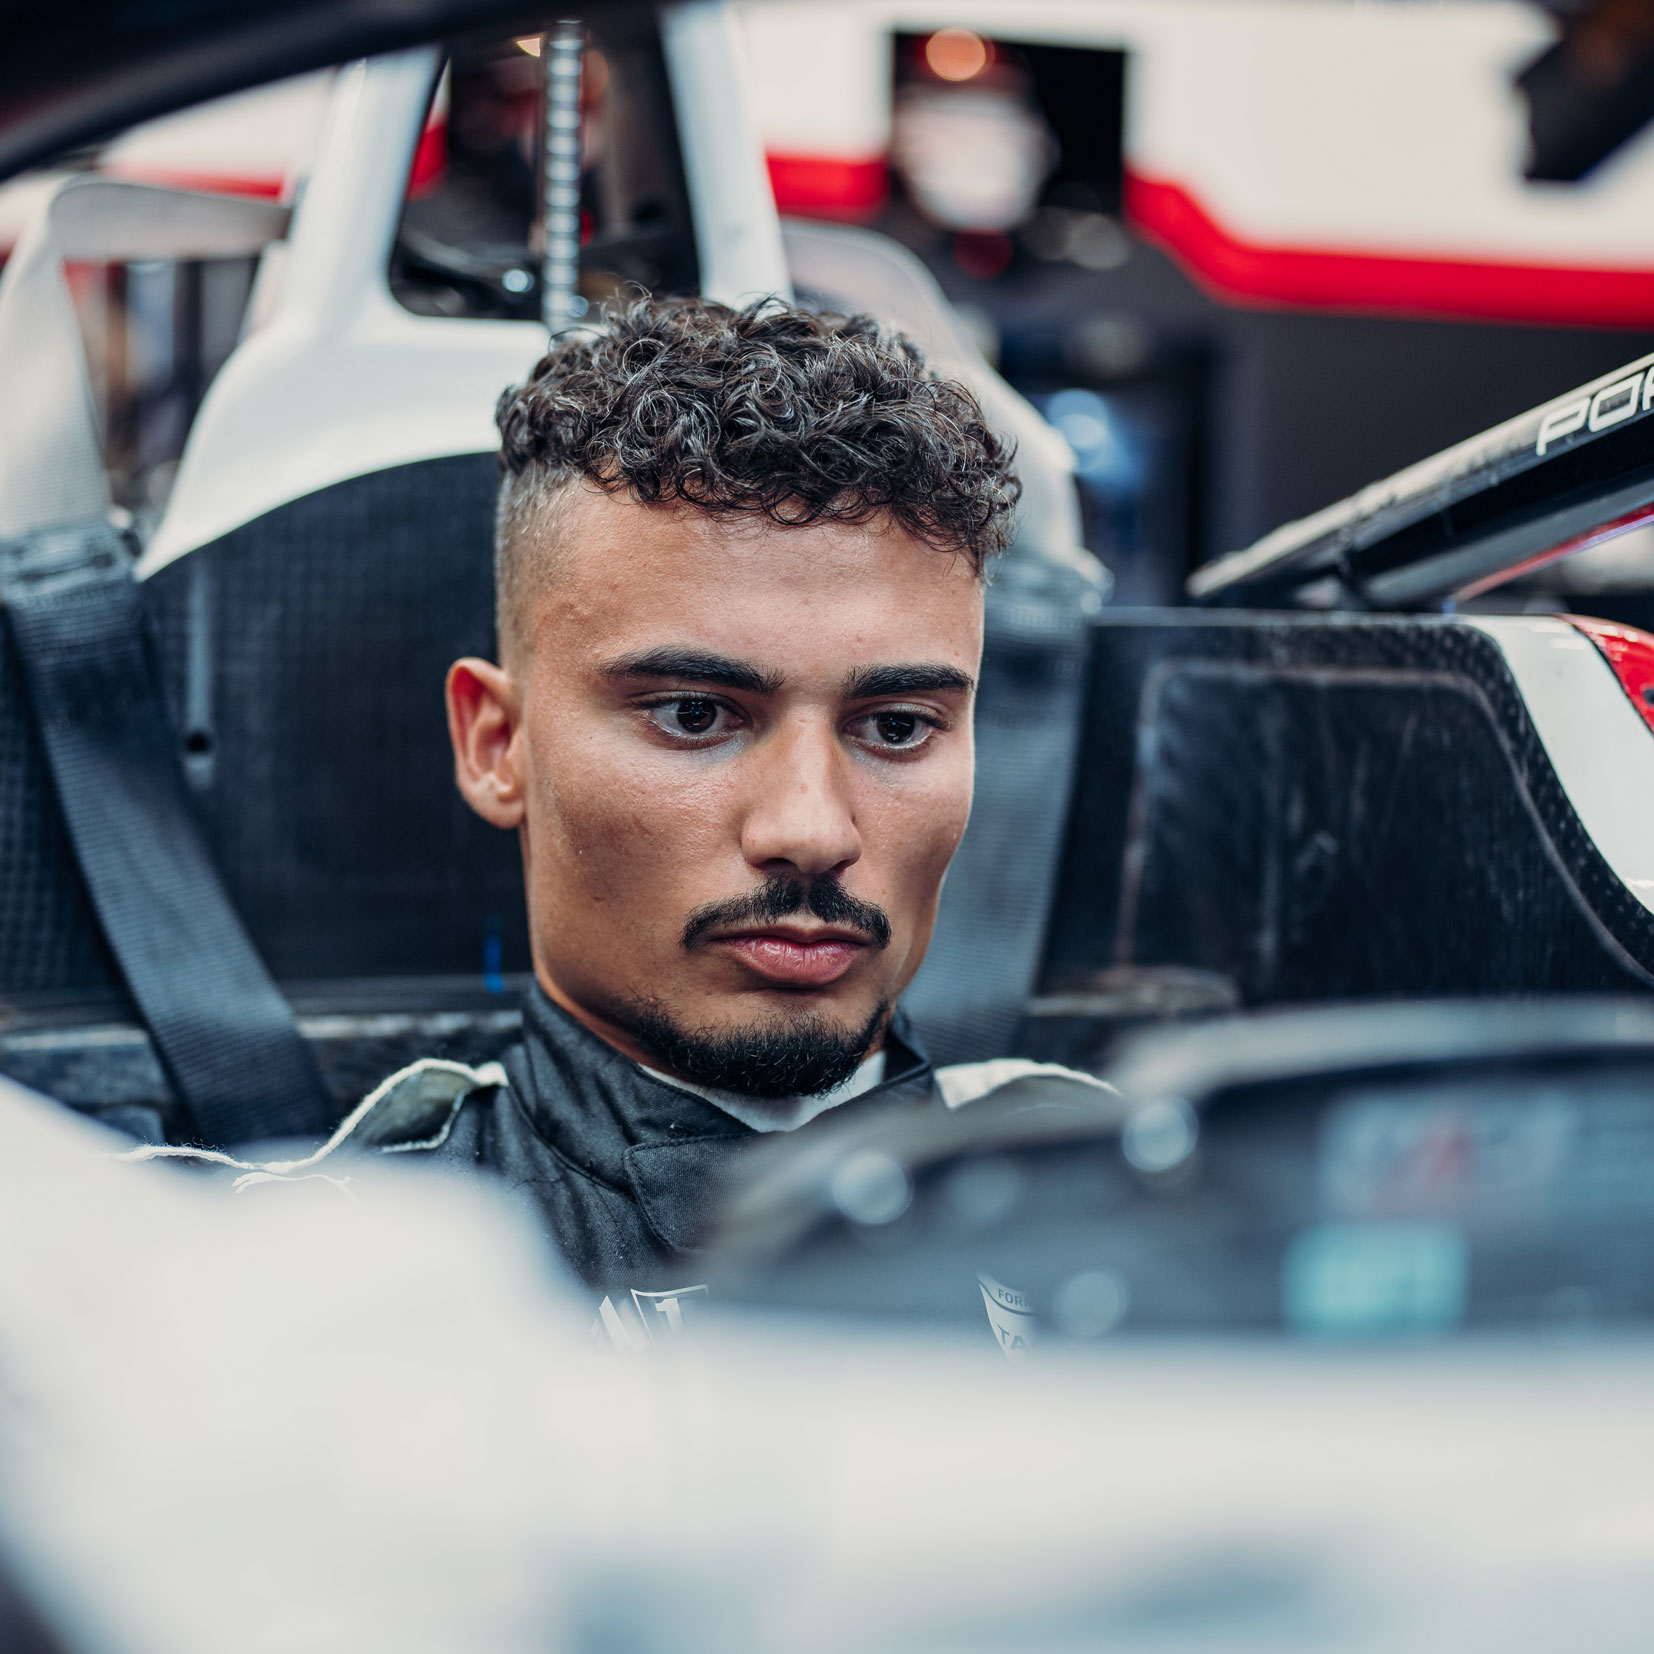 WEHRLEIN CONFIDENT BEFORE CHAMPIONSHIP FINALE IN LONDON